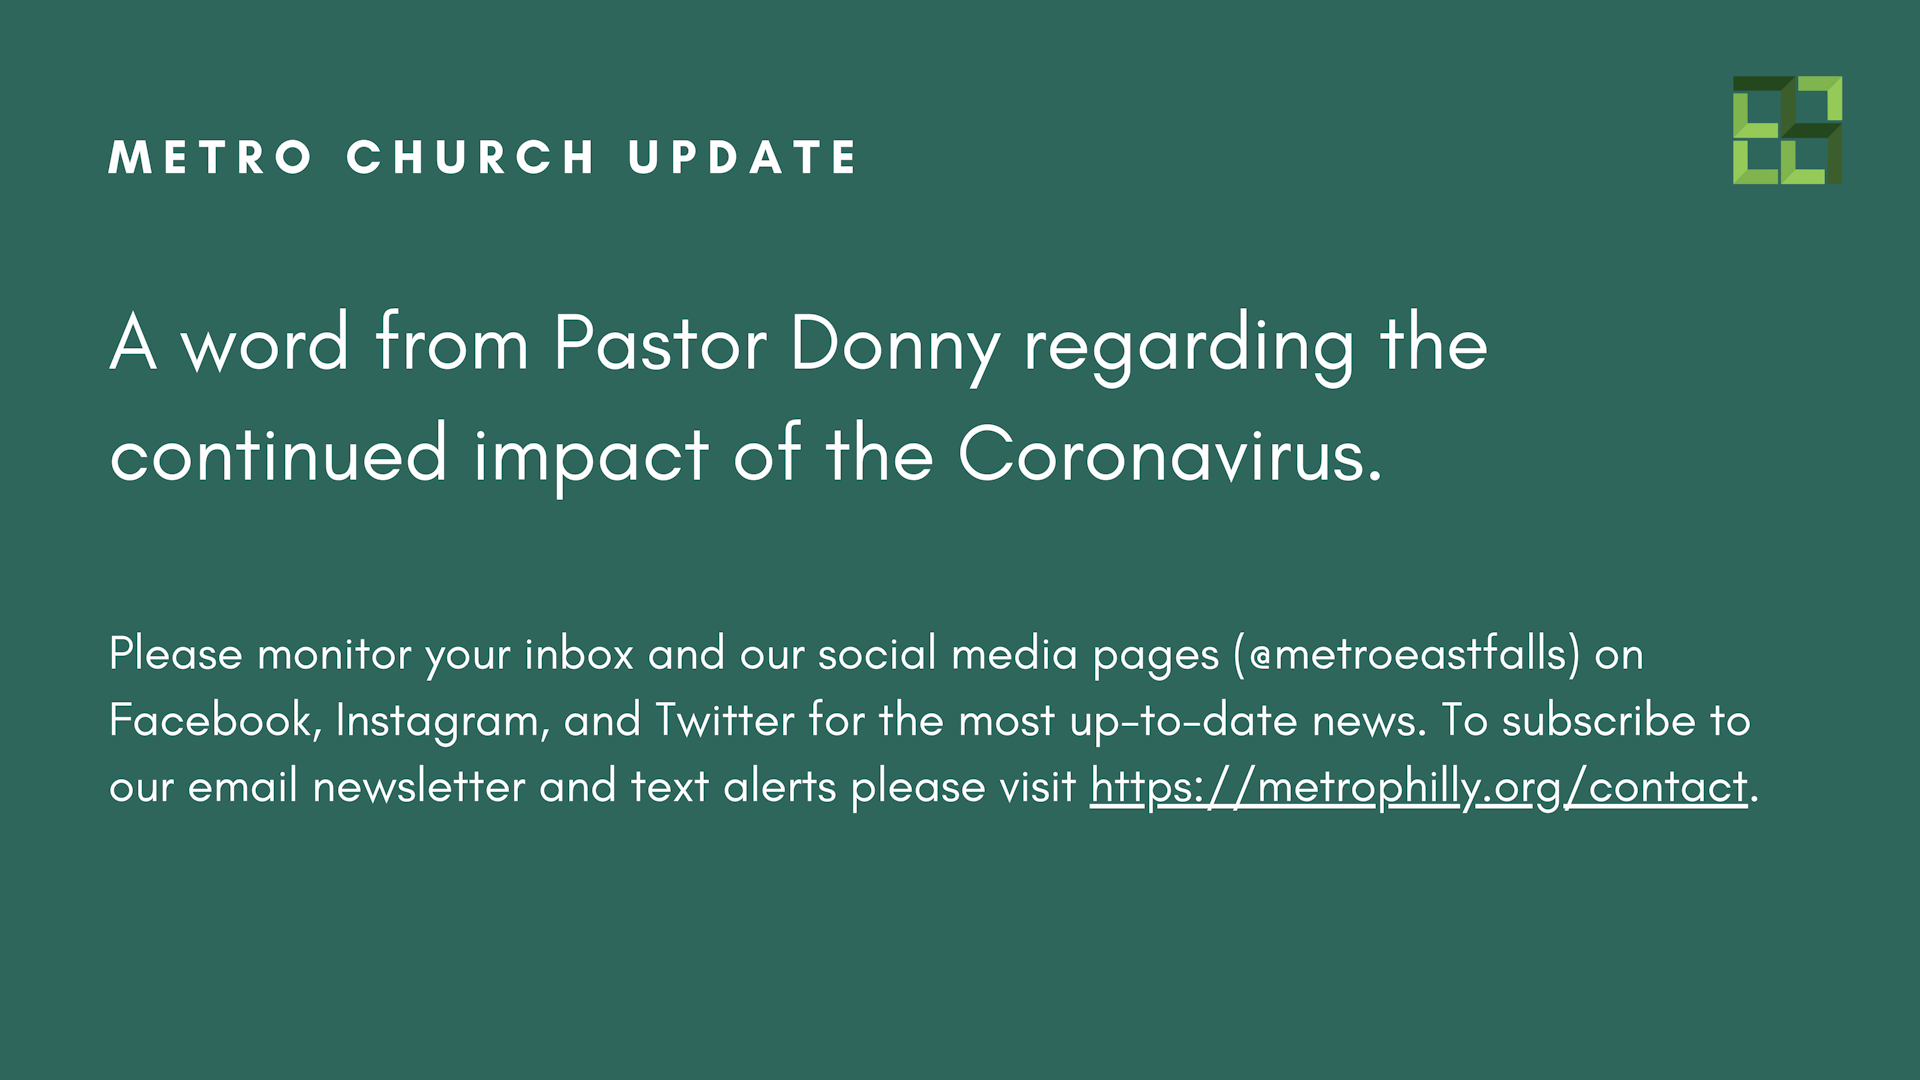 An Update From Pastor Donny, March 19th